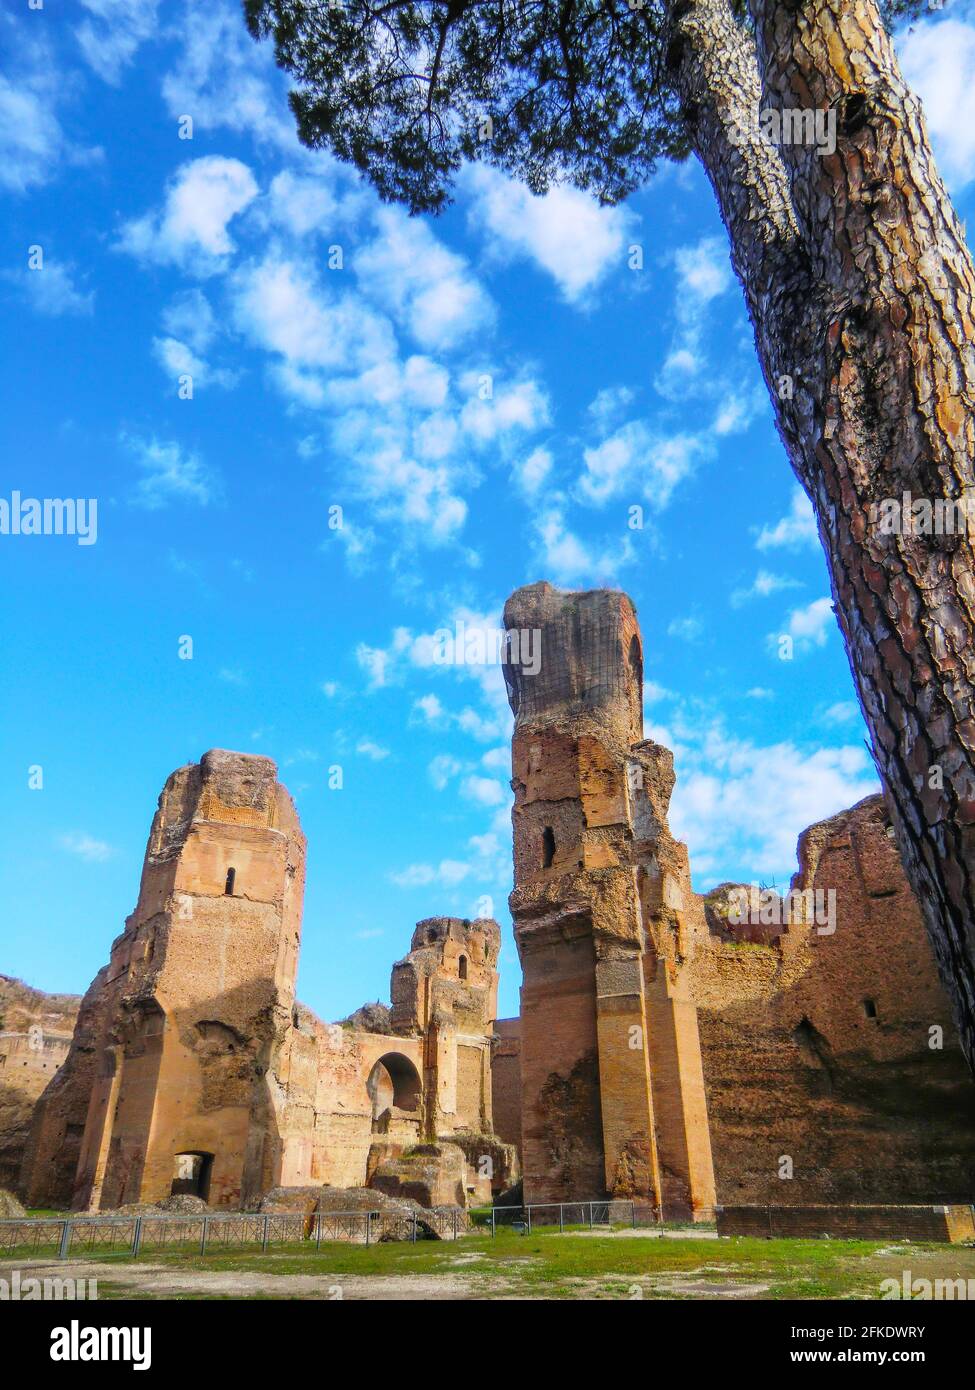 Ruins of the Baths of Caracalla (Terme di Caracalla), Thermae Antoninianae , one of the most important baths of Rome at the time of the Roman Empire, Stock Photo